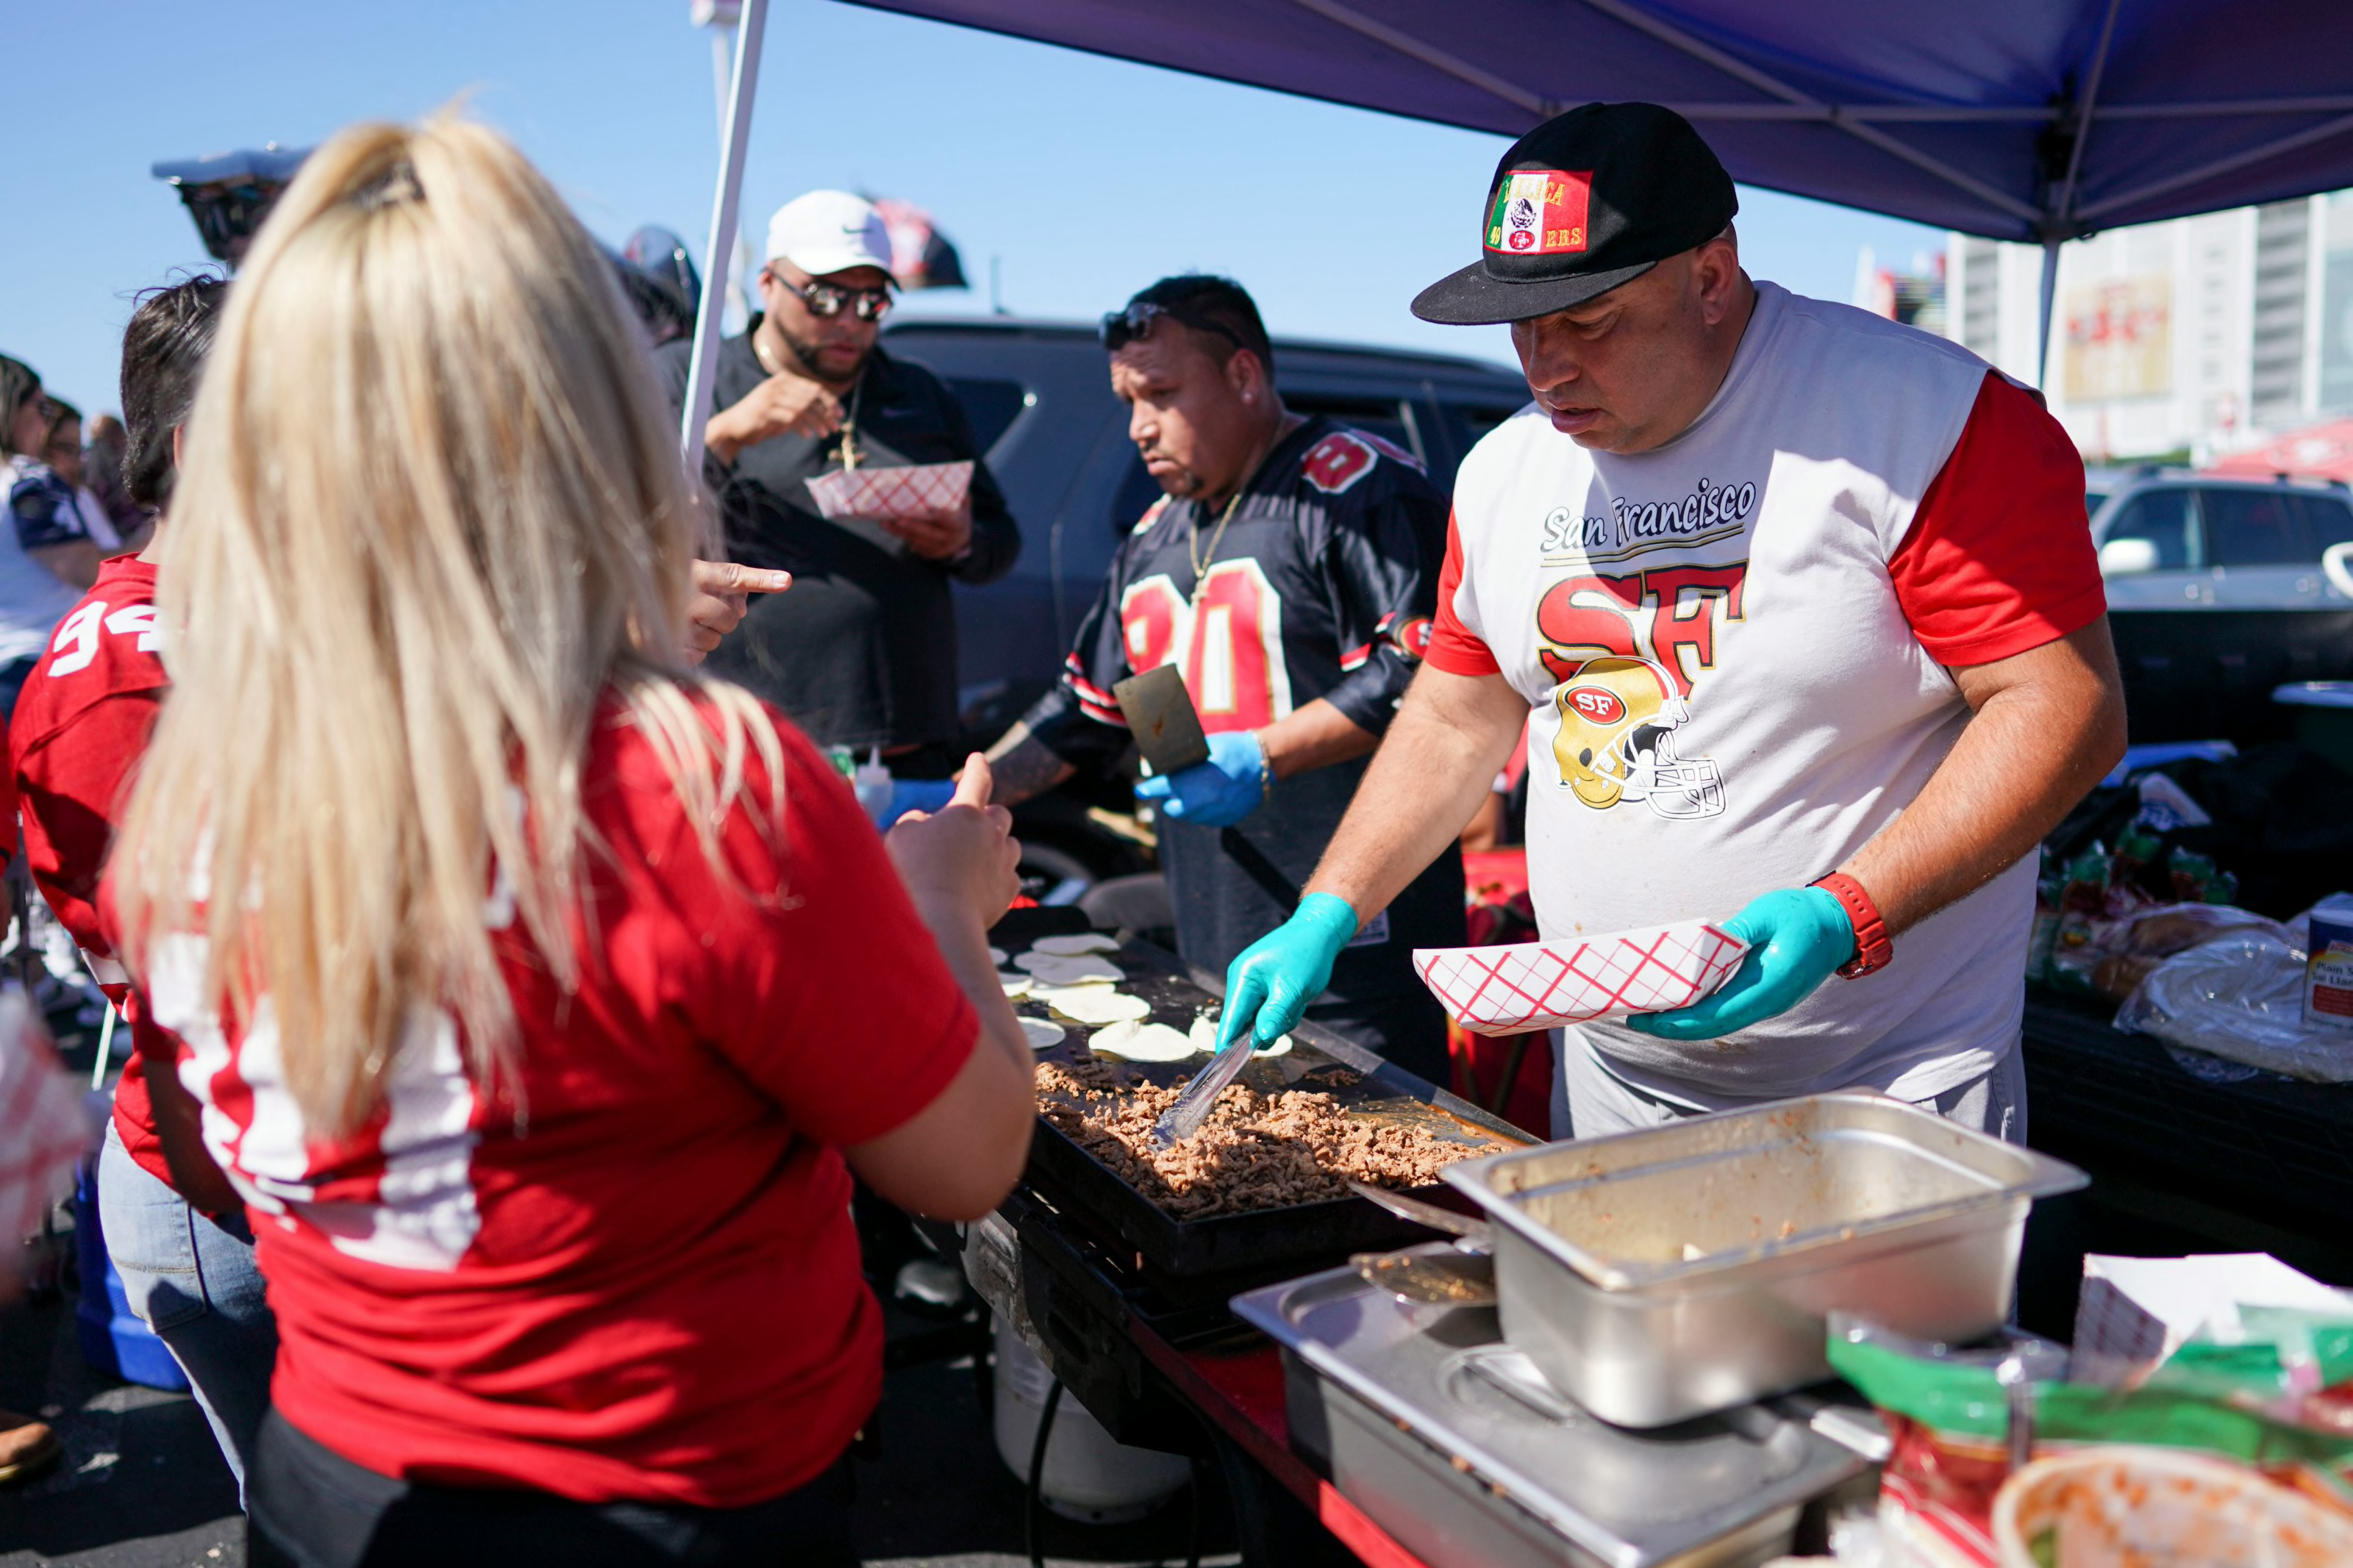 The 10 worst tailgate foods 49ers fans should hate (but don't) - Page 2